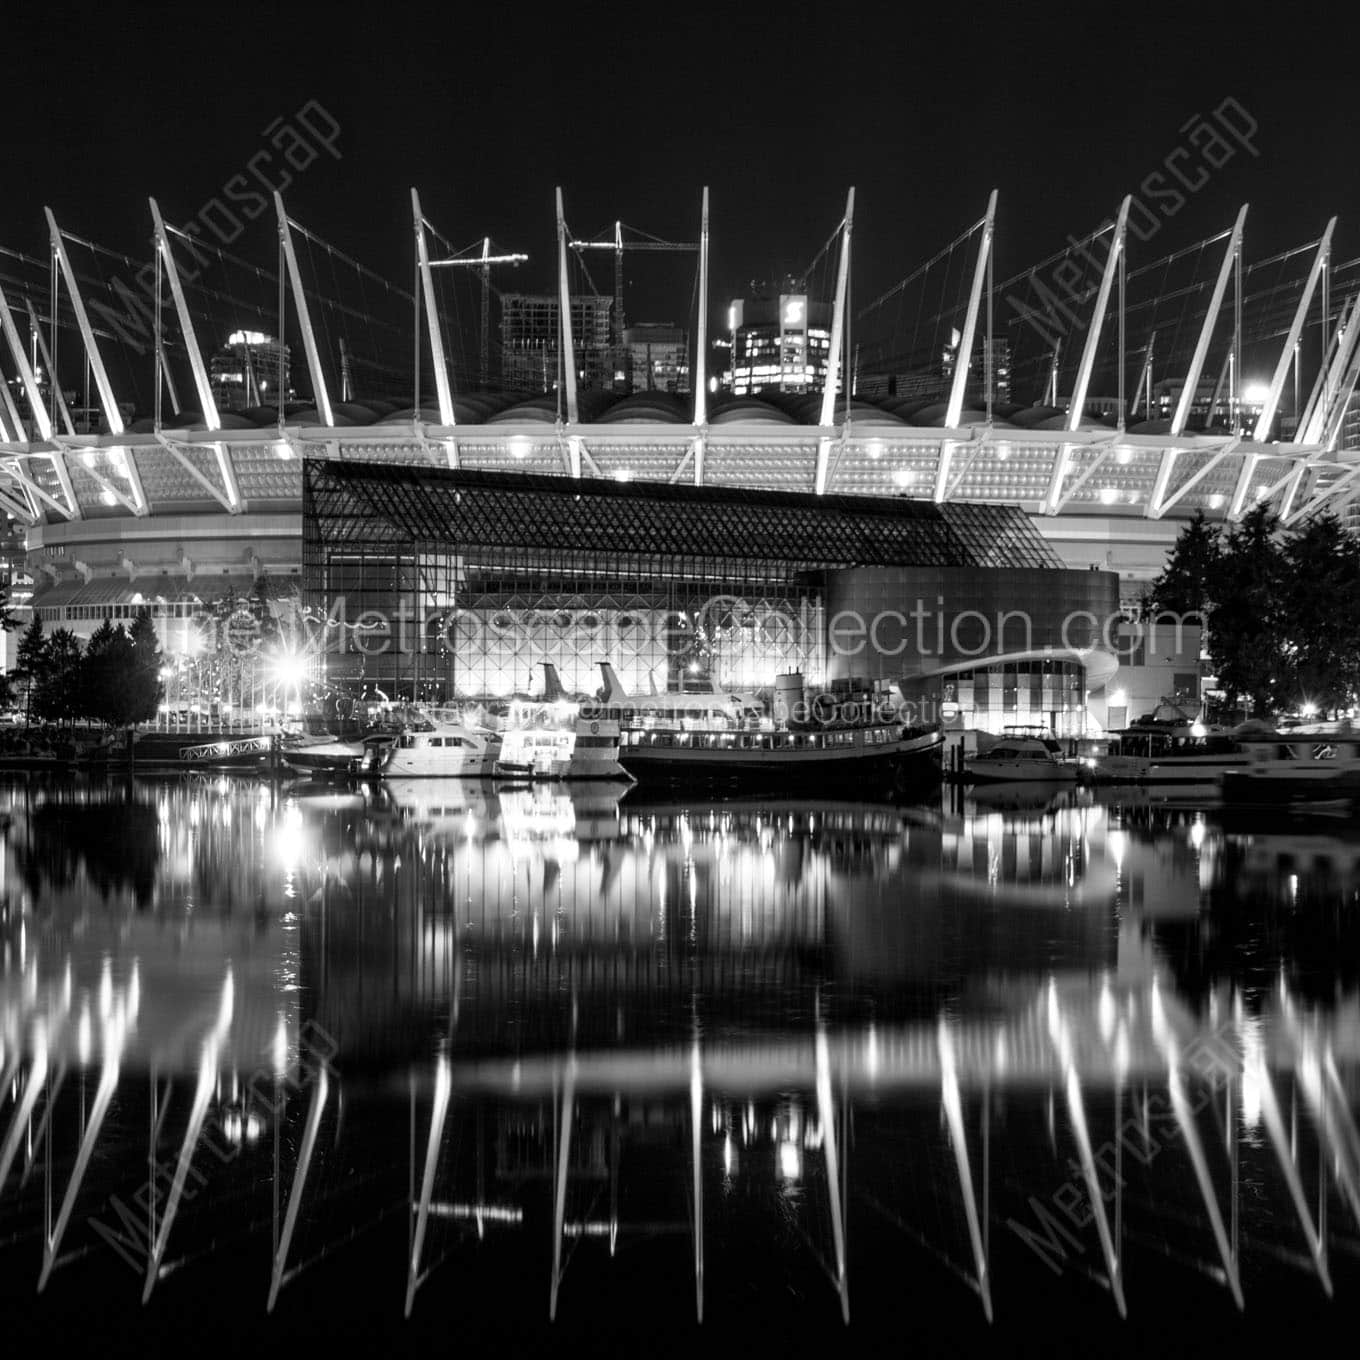 bc place at night Black & White Office Art